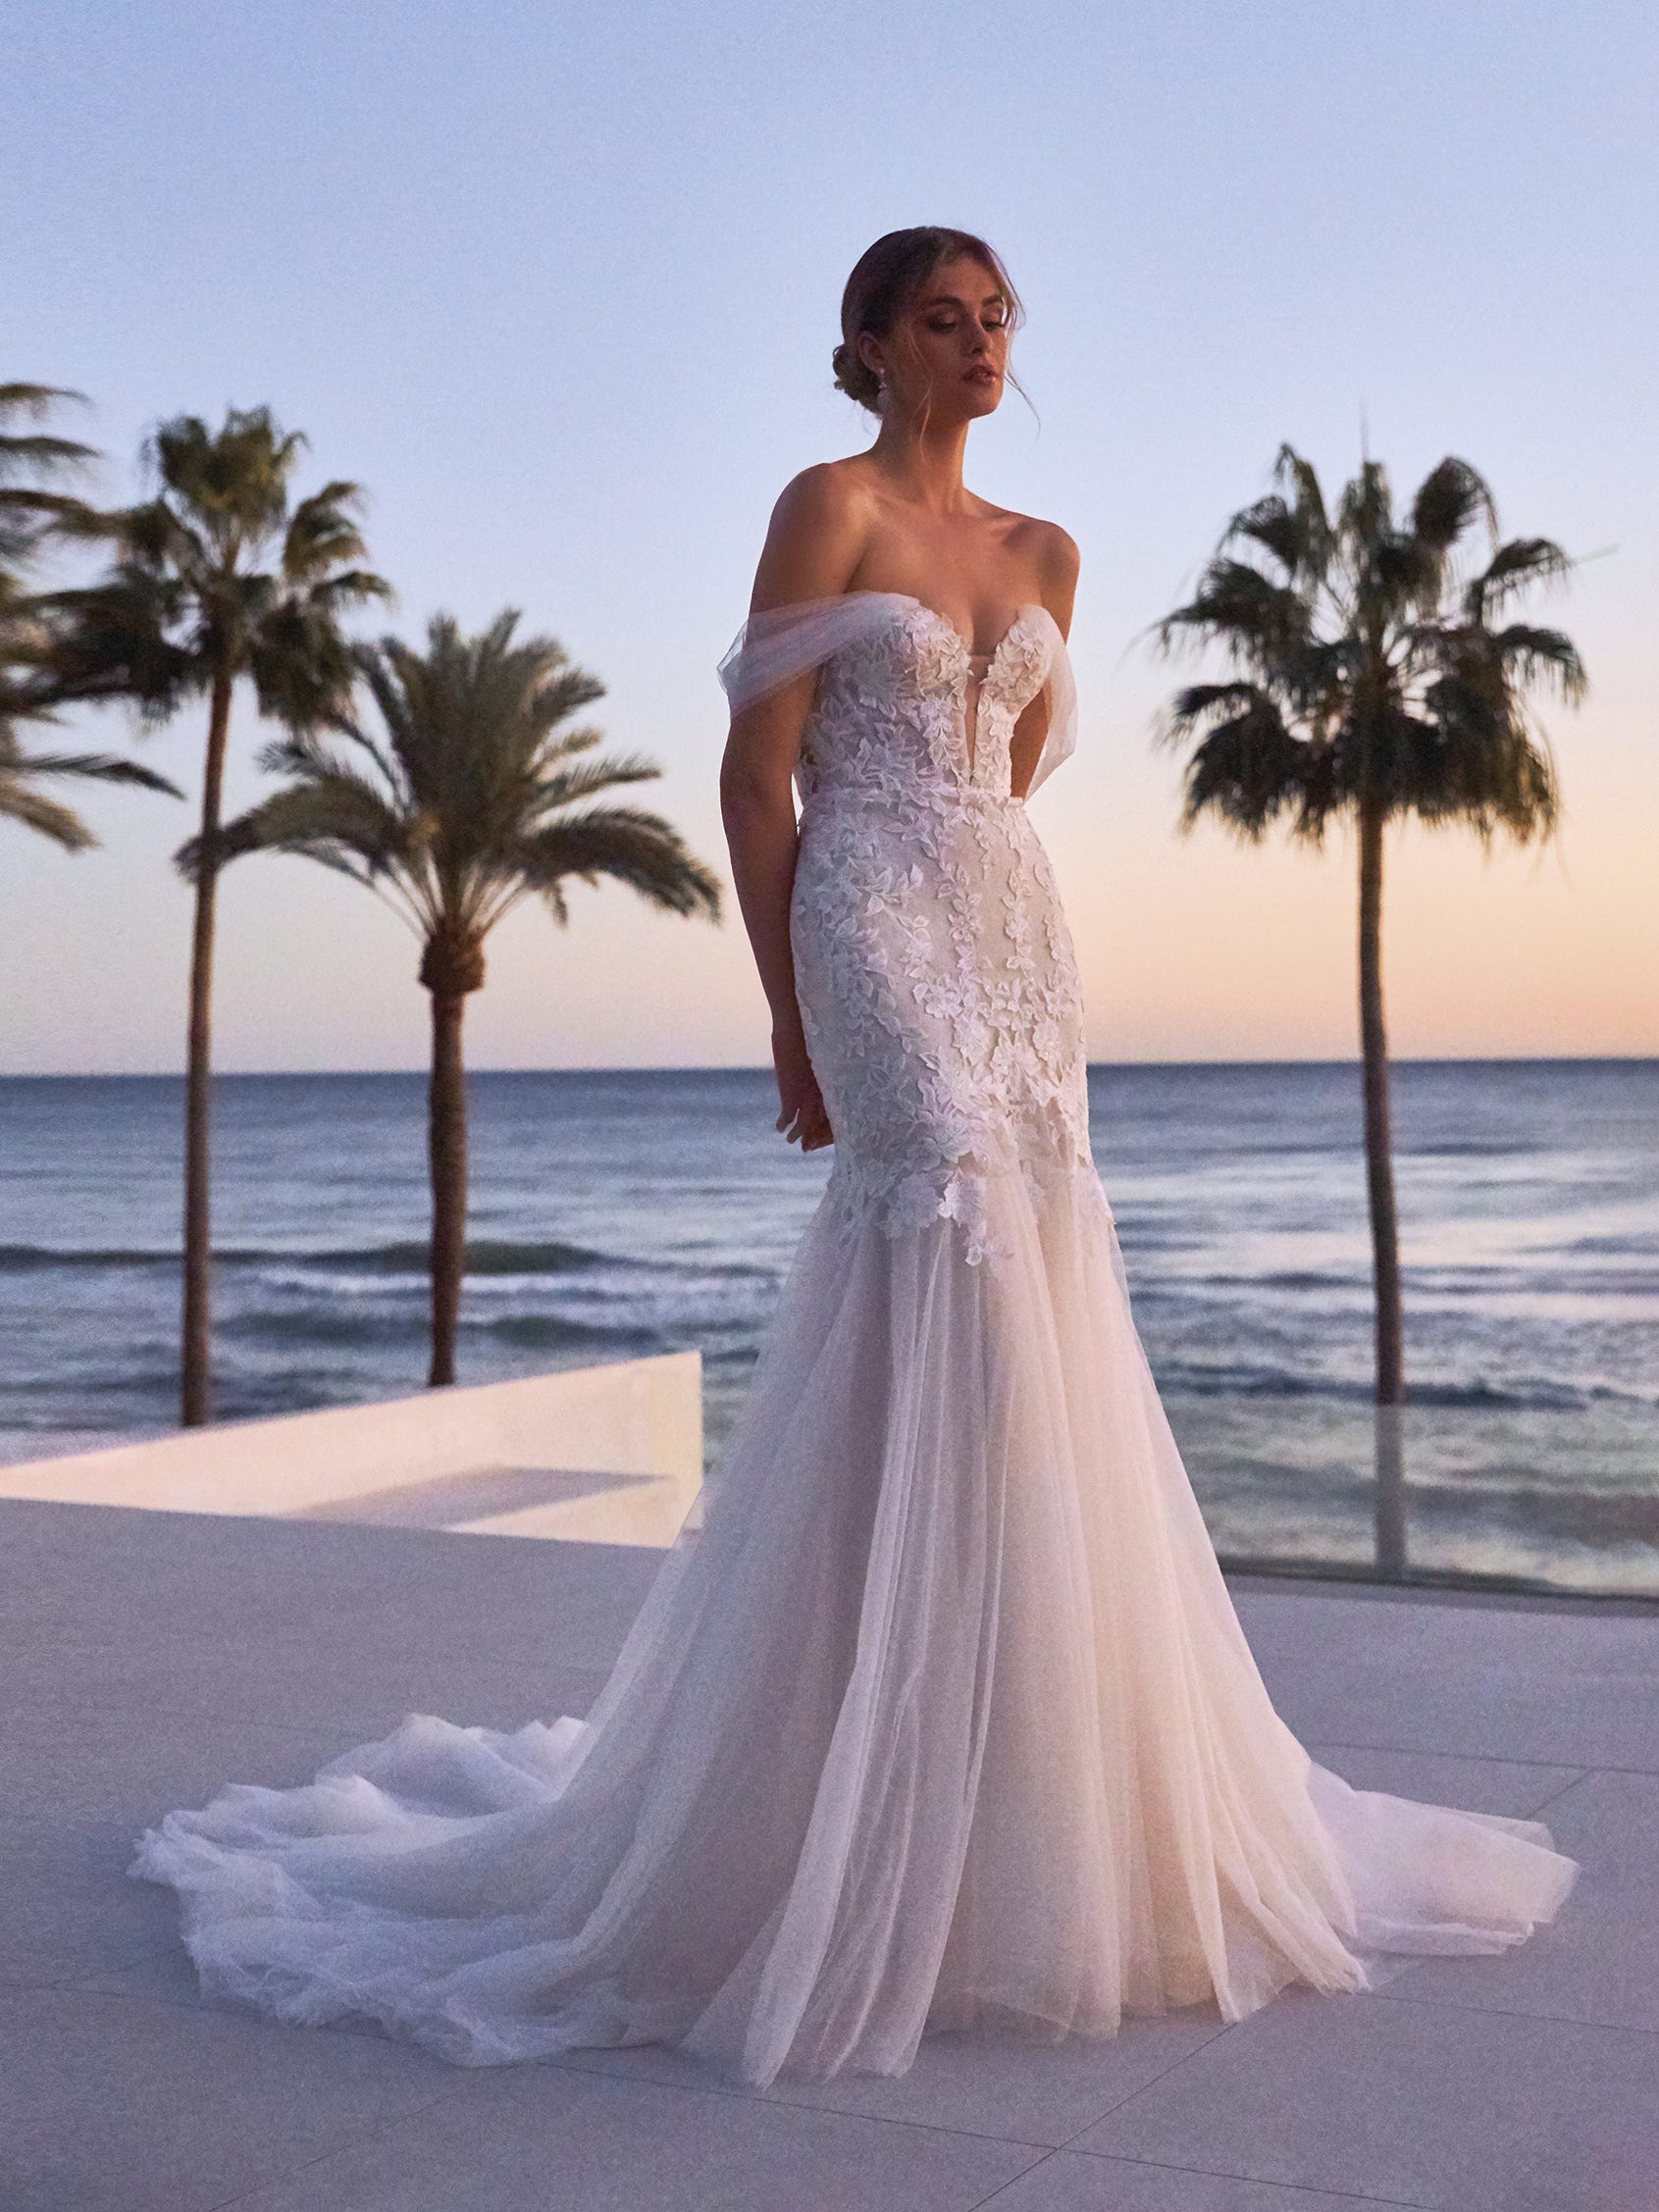 Stylish Short Wedding Dresses That We Can't Get Enough Of